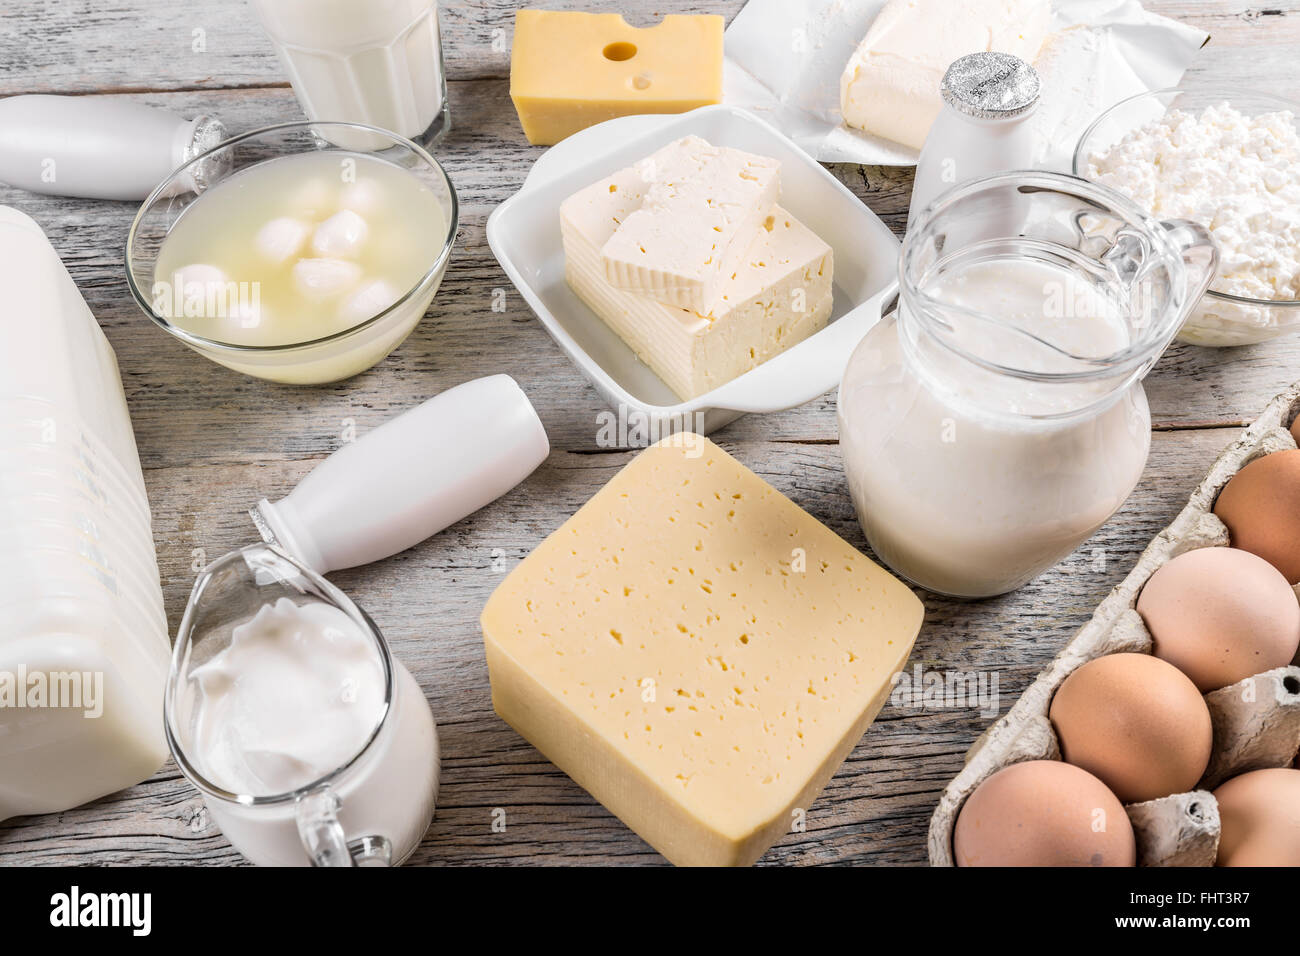 Various types of dairy products on wooden background Stock Photo